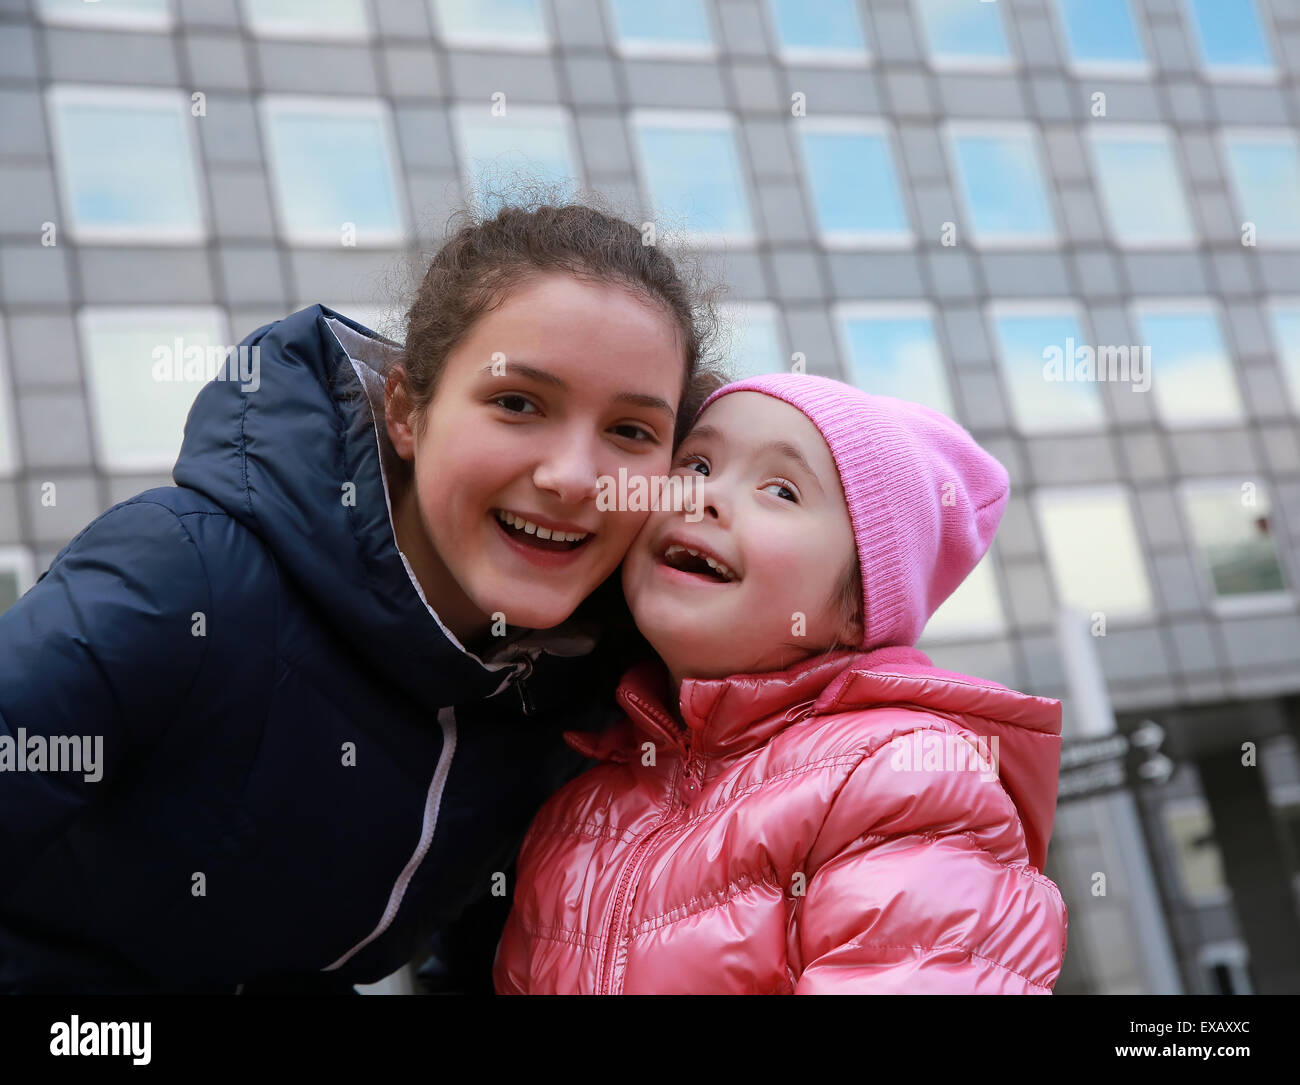 Happy family moments - Young girls having fun Stock Photo